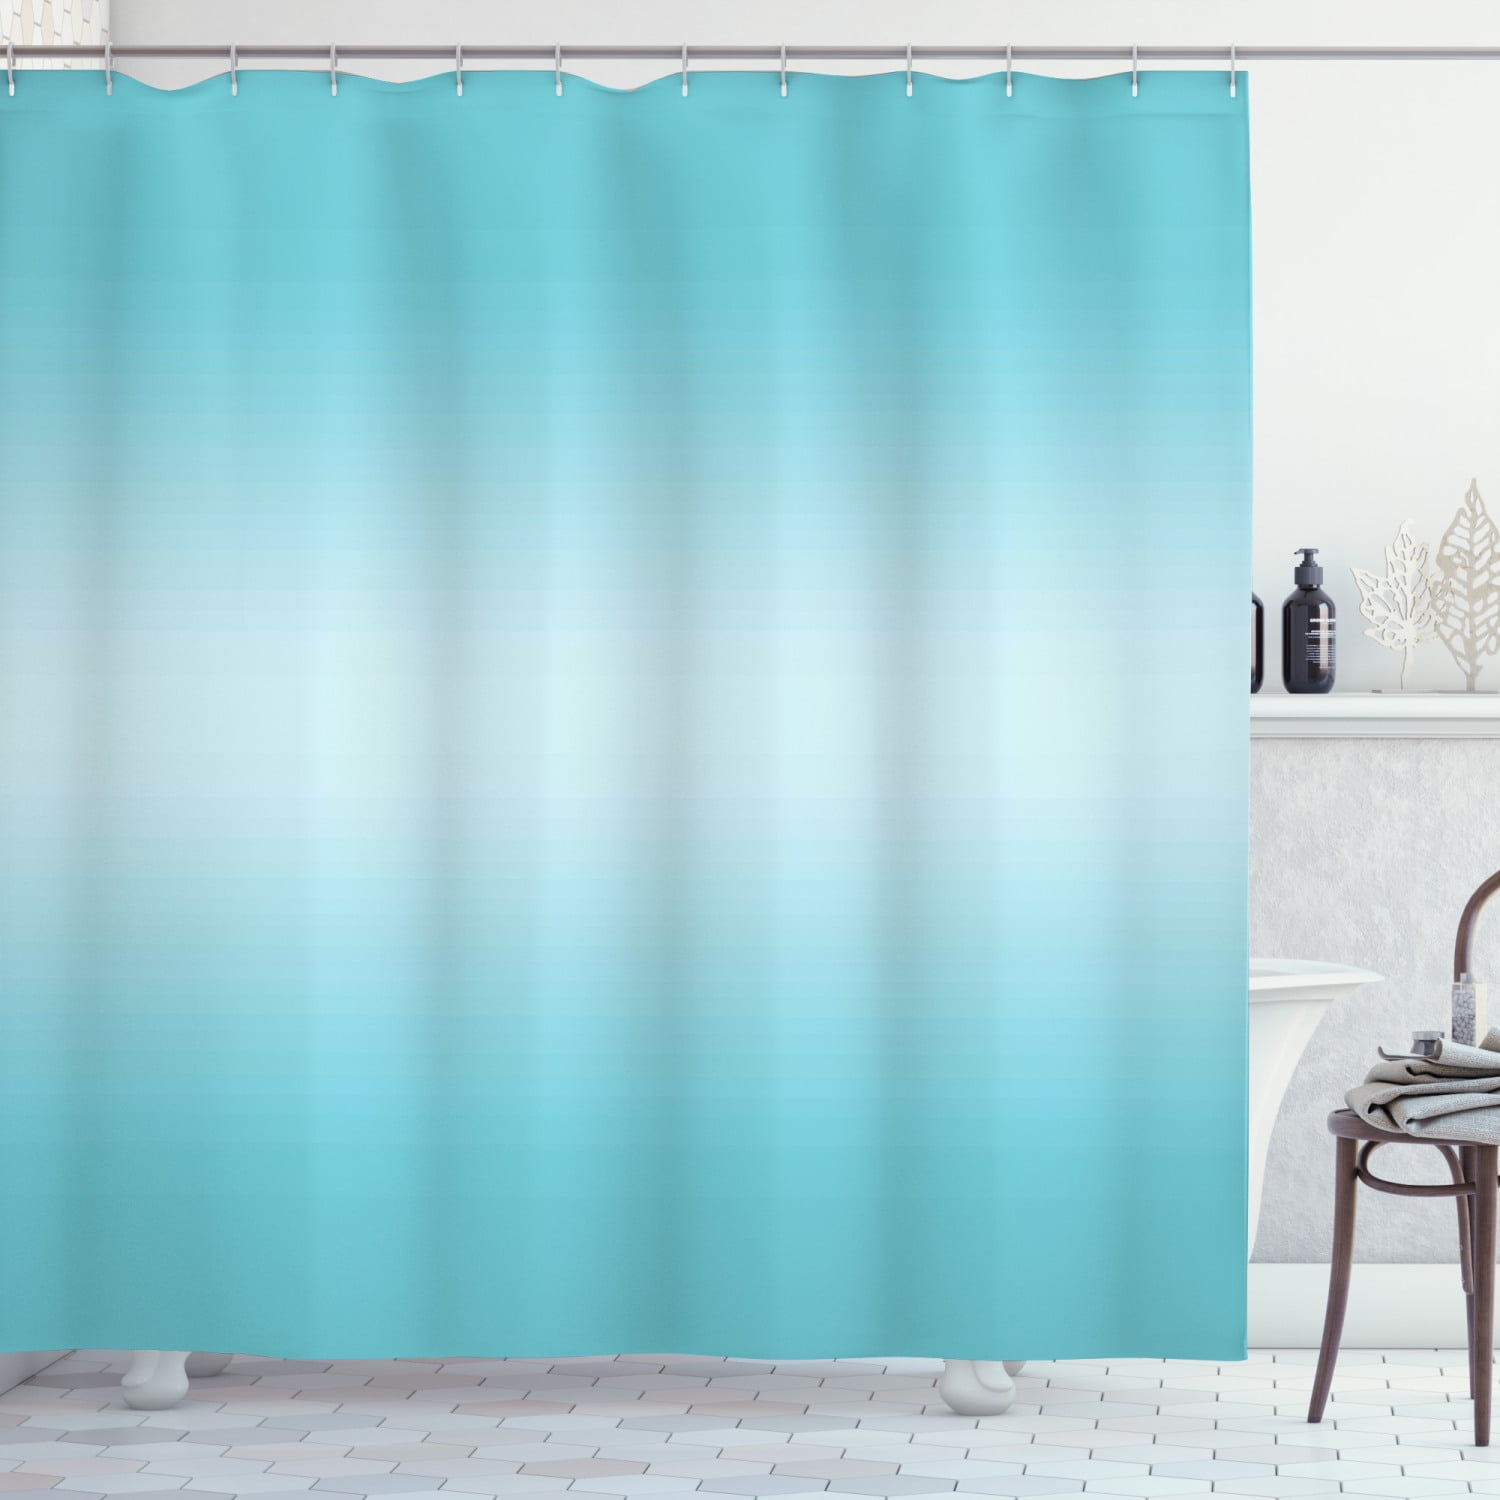 Modern Simple Light Blue Ombre Horizontal Striped Shower Curtain Set With Hooks 